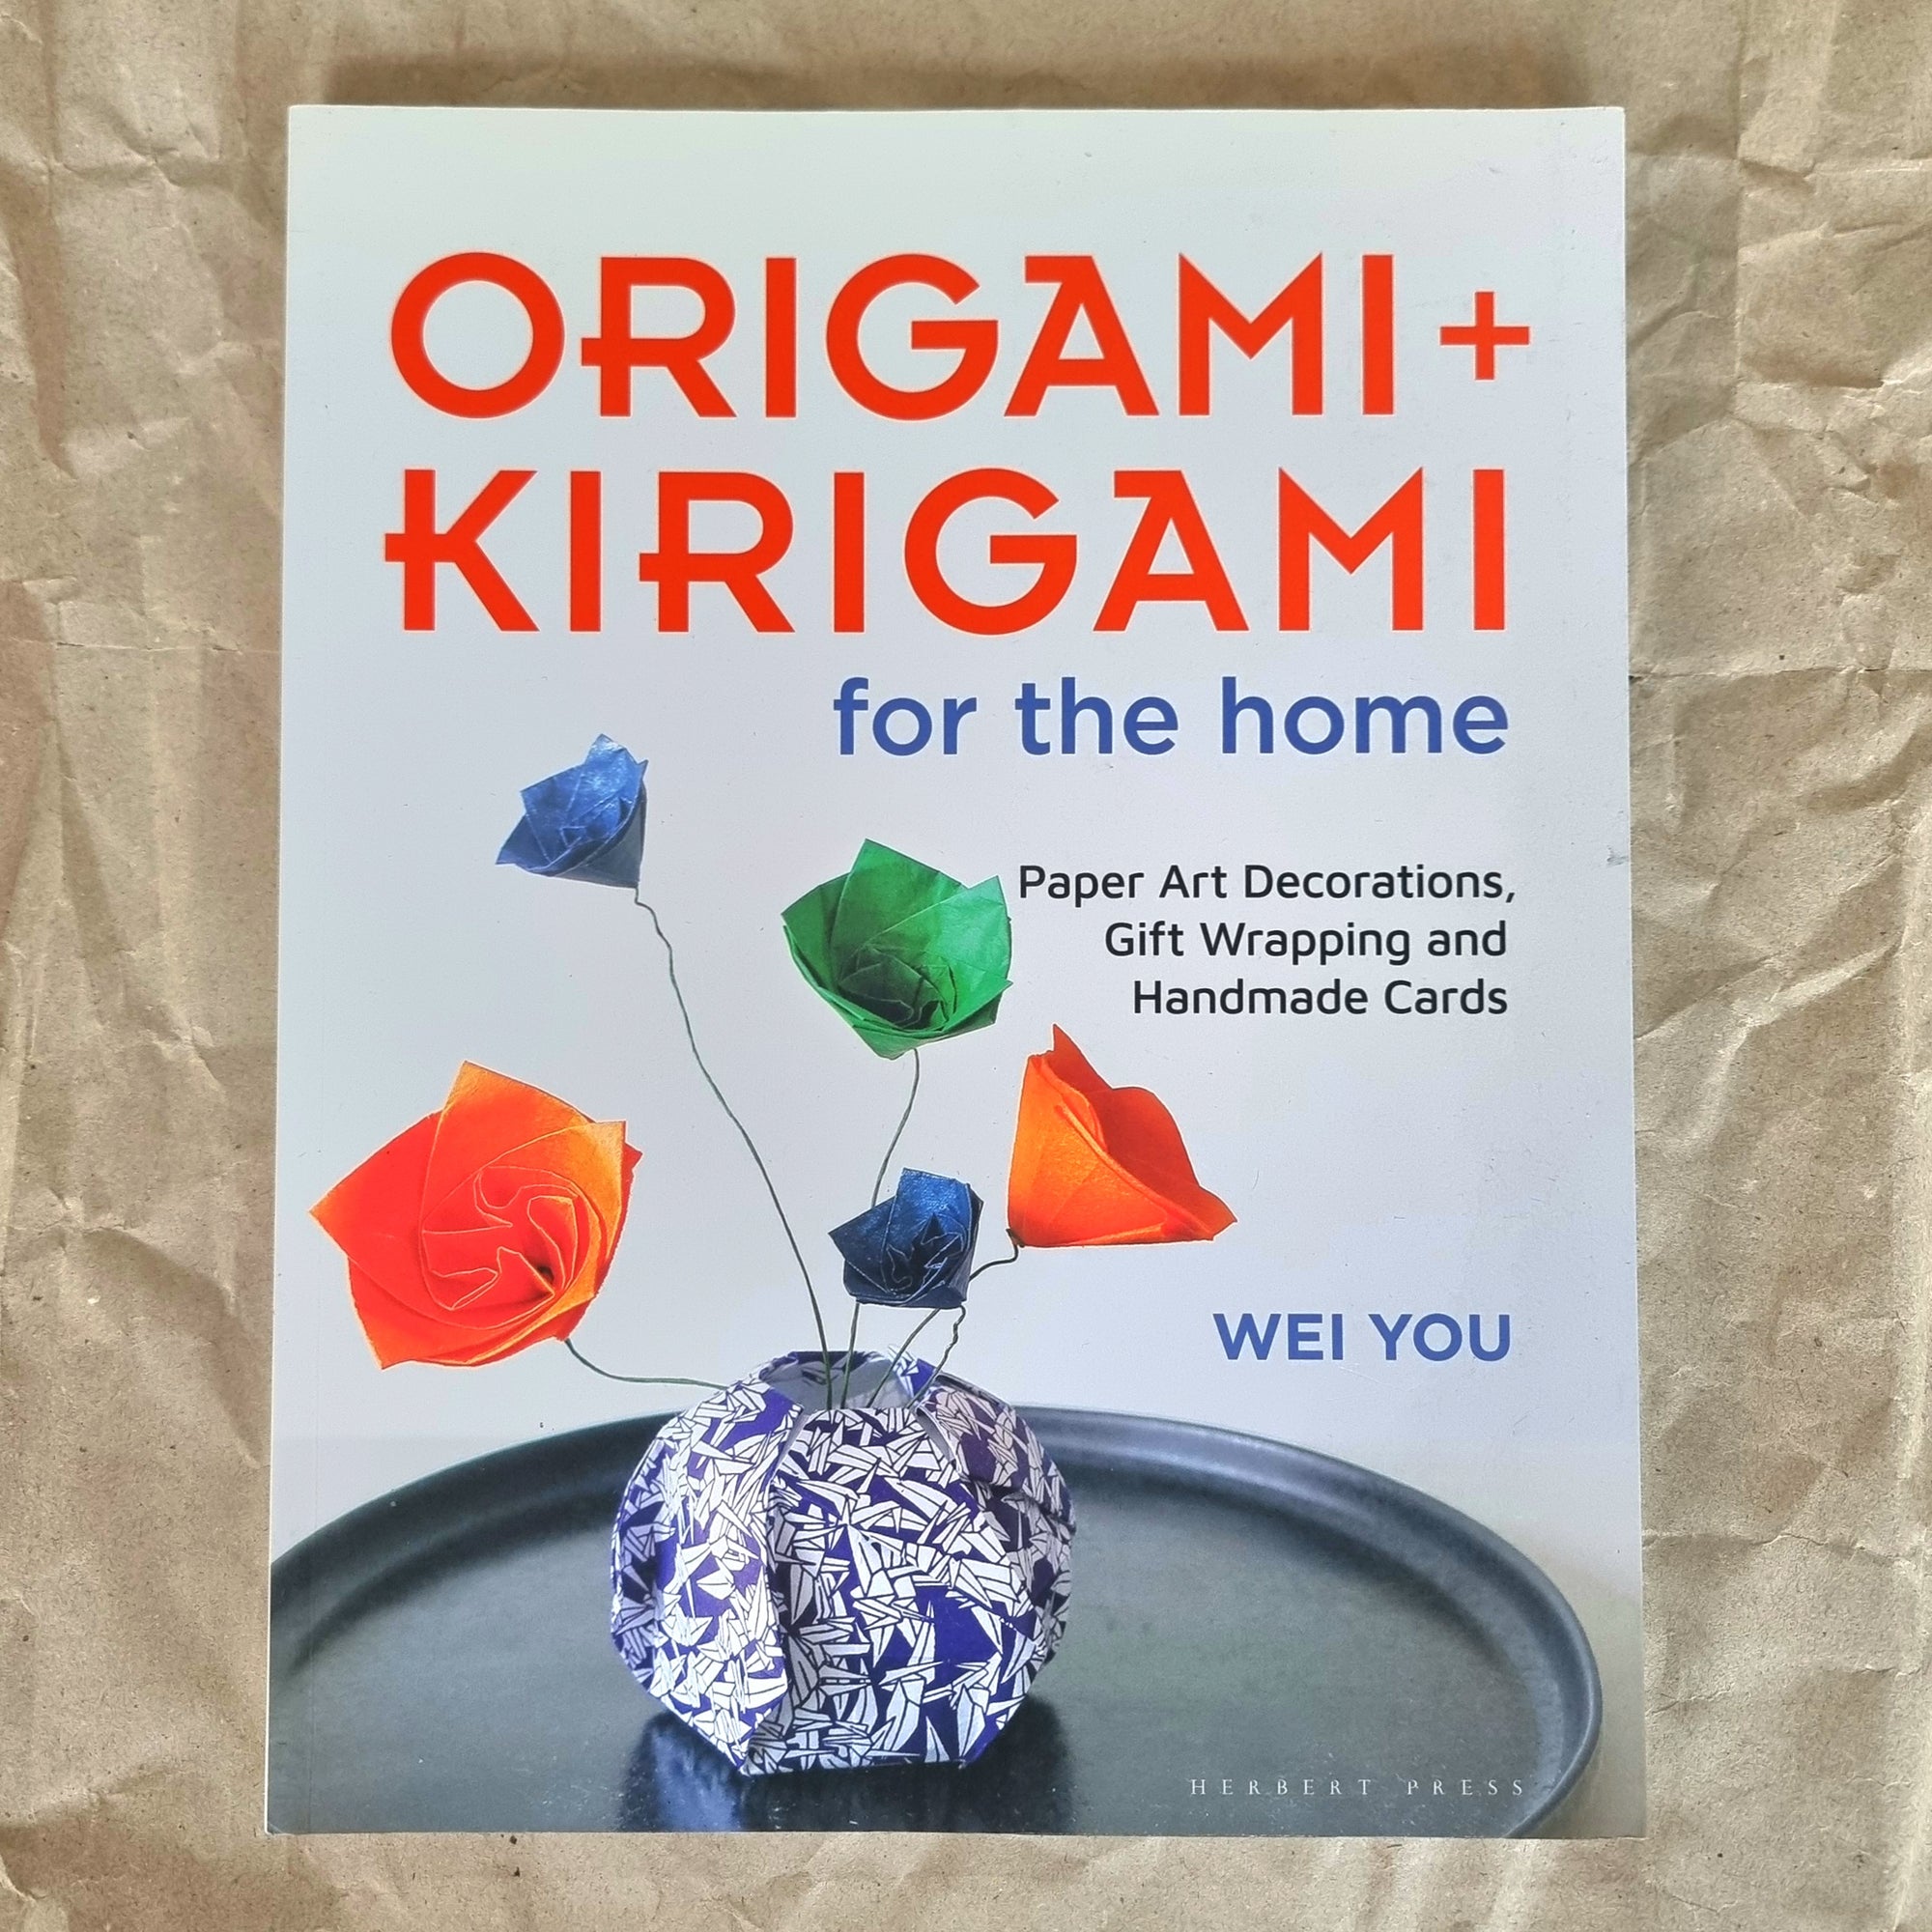 Origami + Kirigami for the home